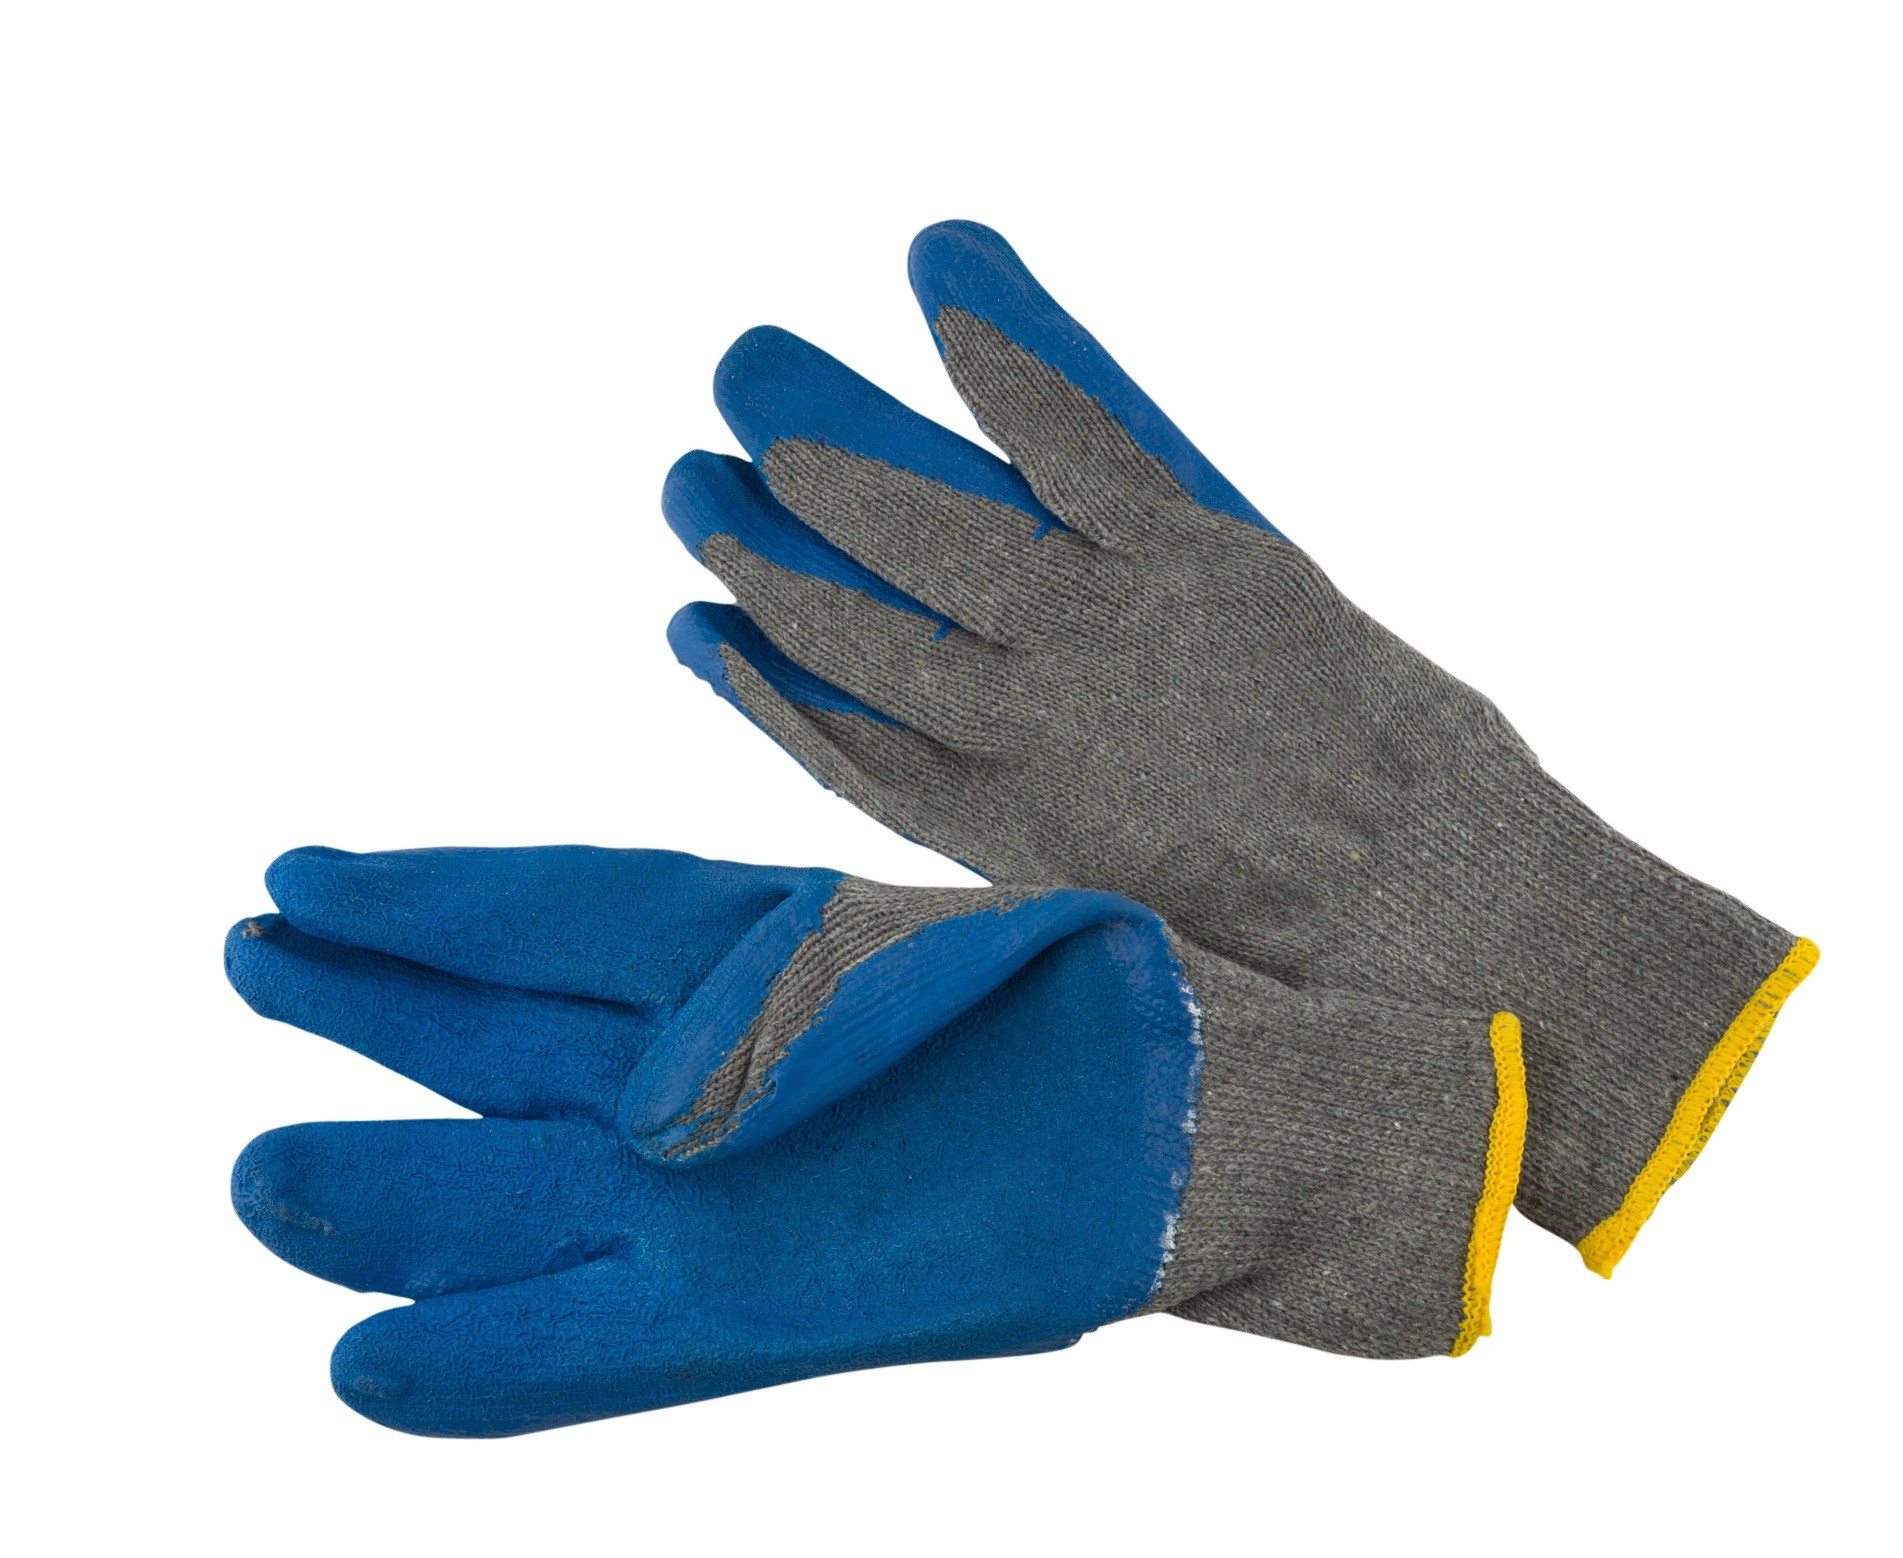 KNIT LINED GLOVES WITH BLUE LATEX COATING